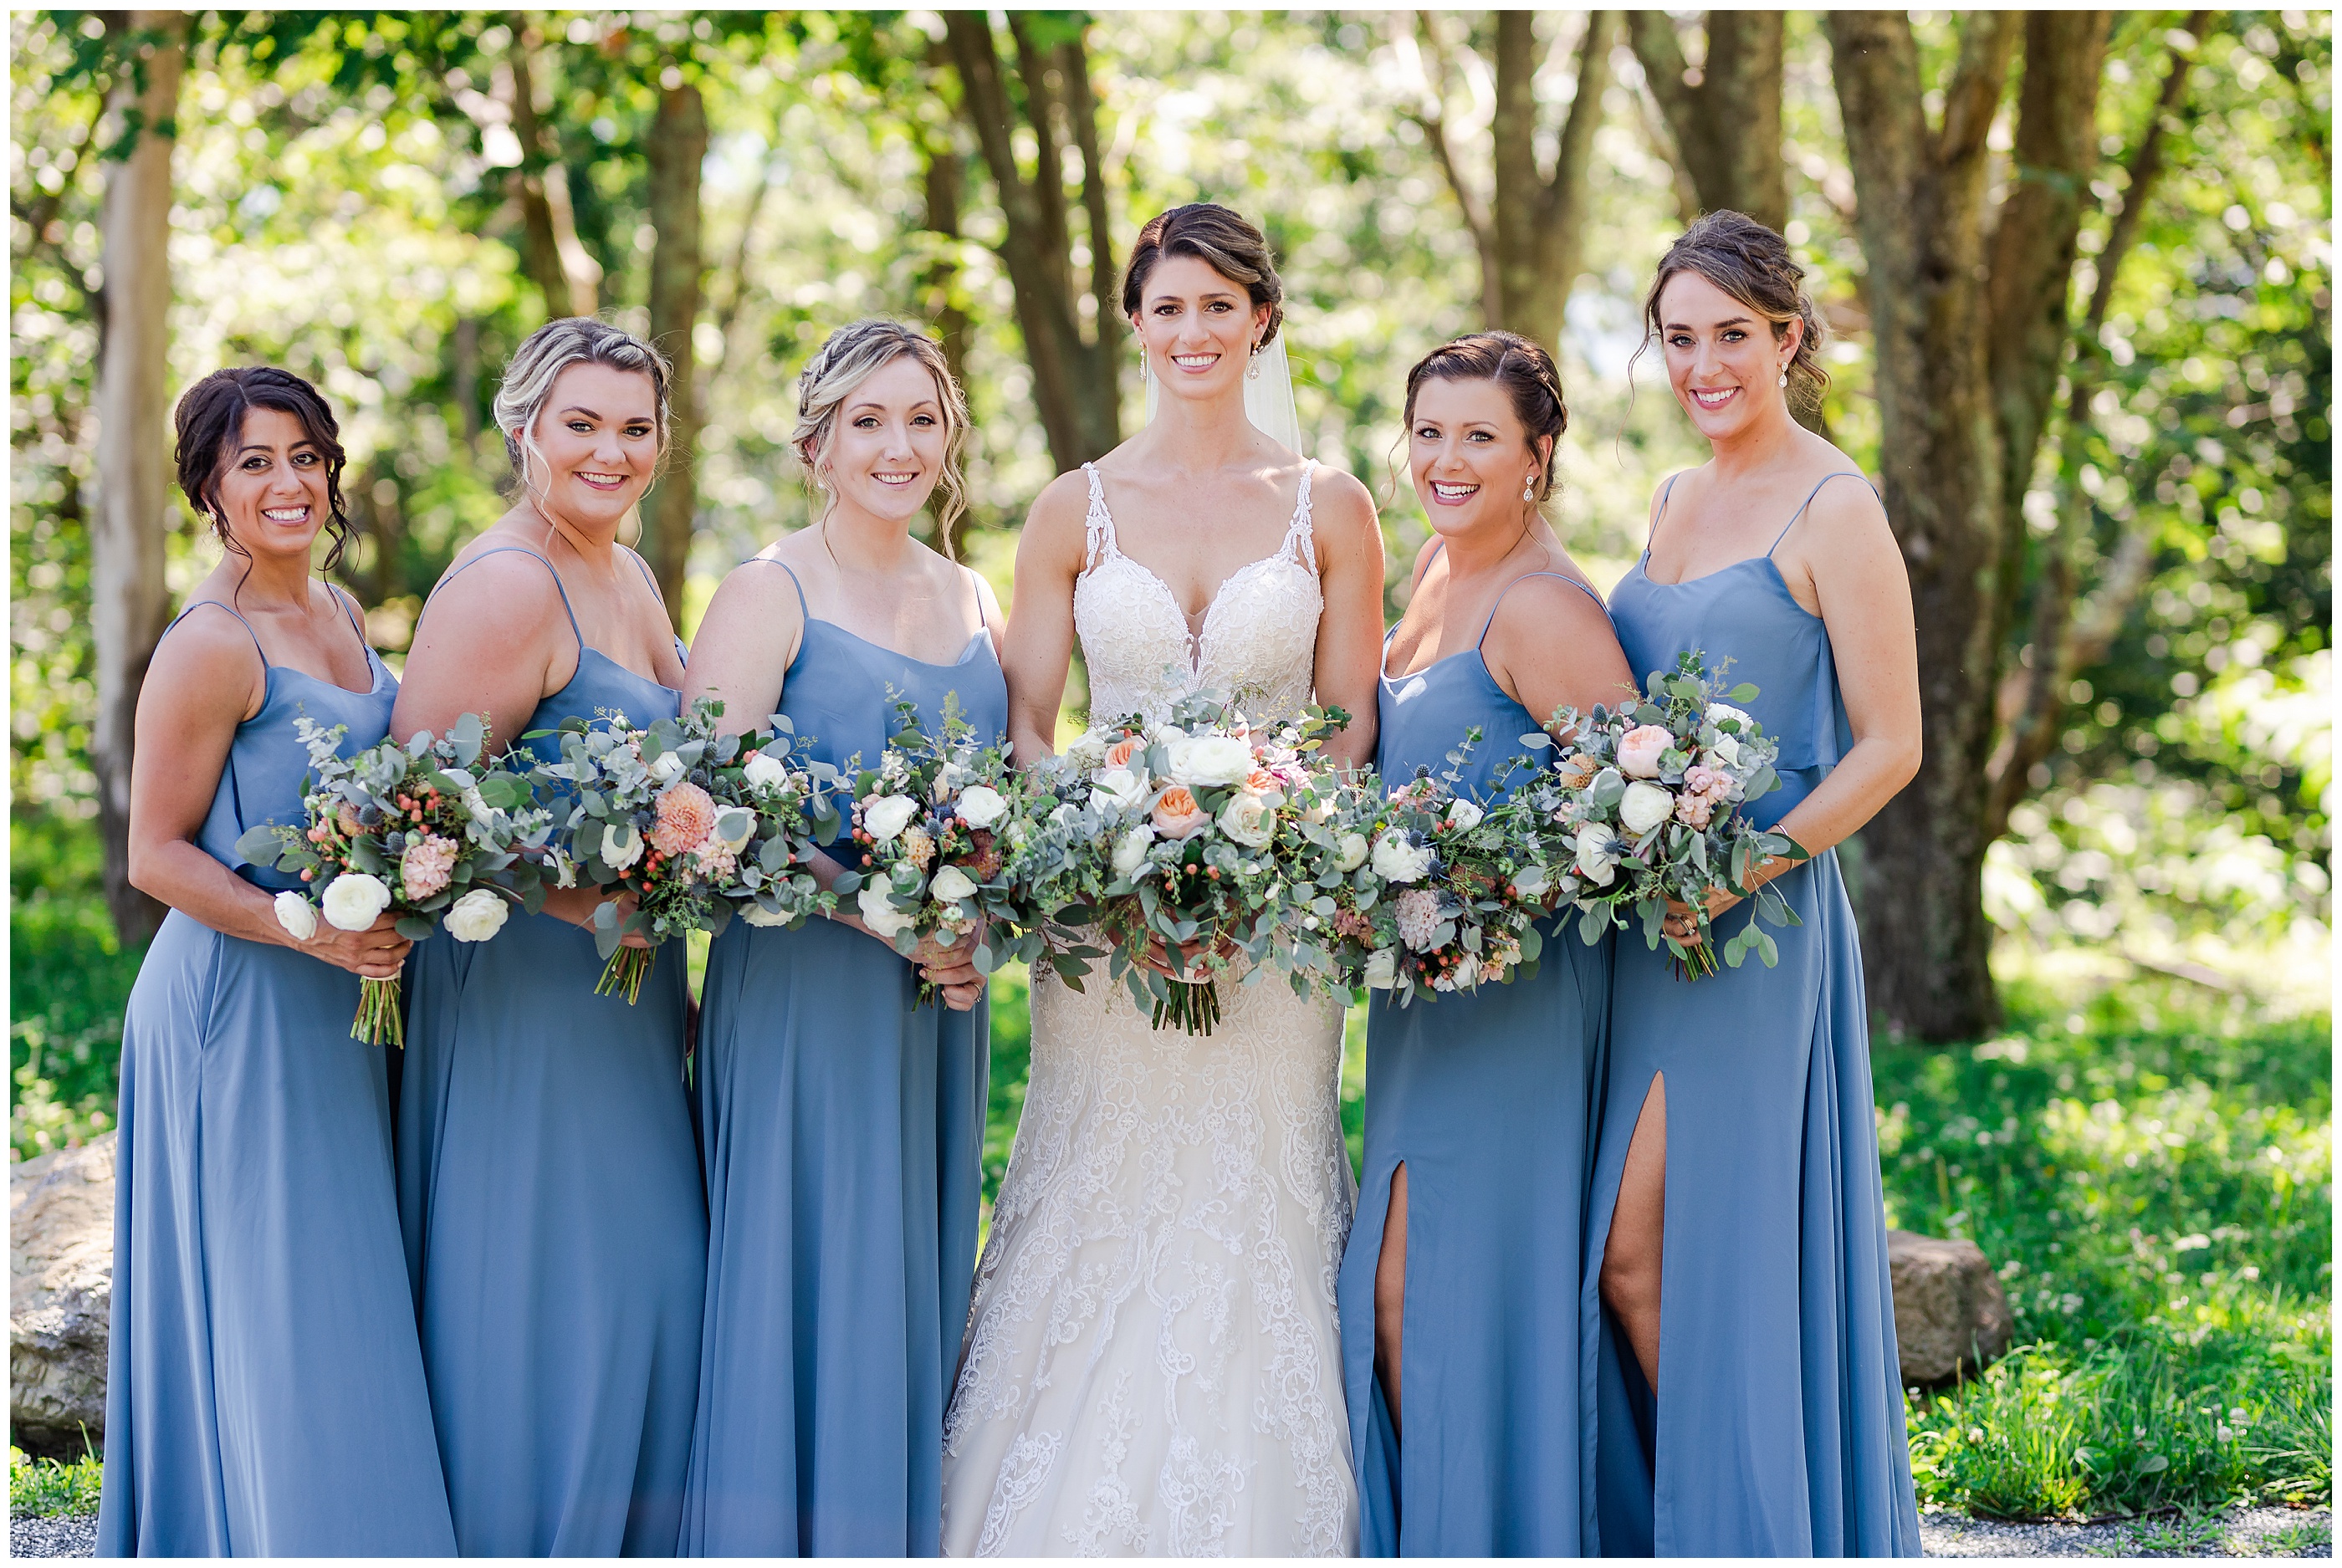 Bridesmaids with Bride in Blue Bridesmaid dresses Luke and Ashley Photography 